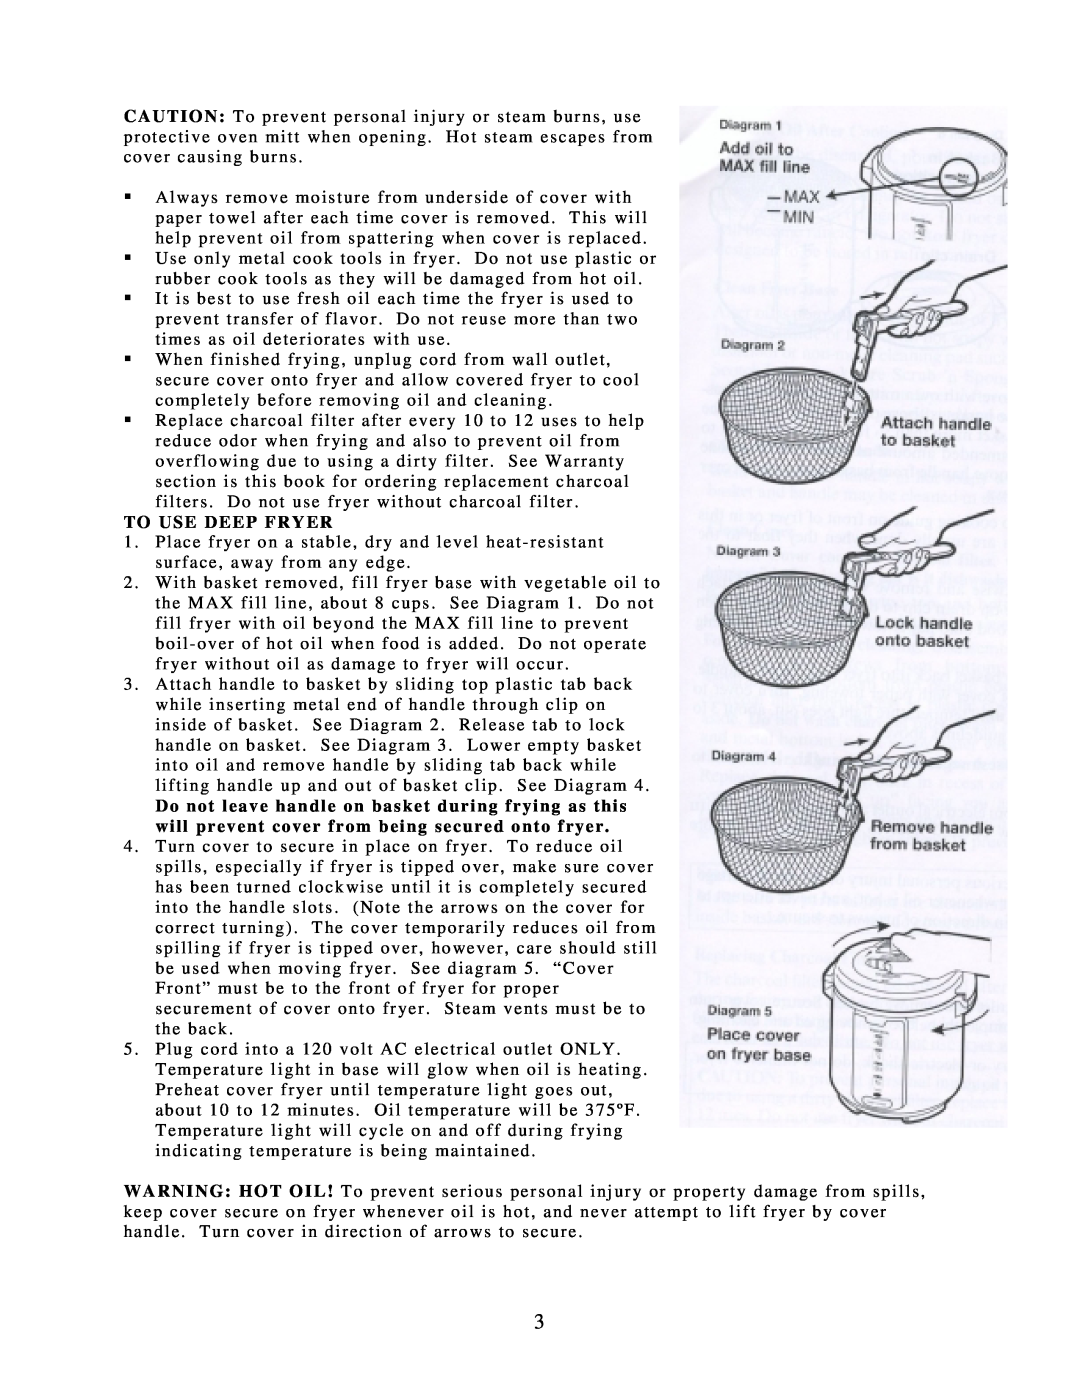 West Bend L5262 instruction manual To Use Deep Fryer 